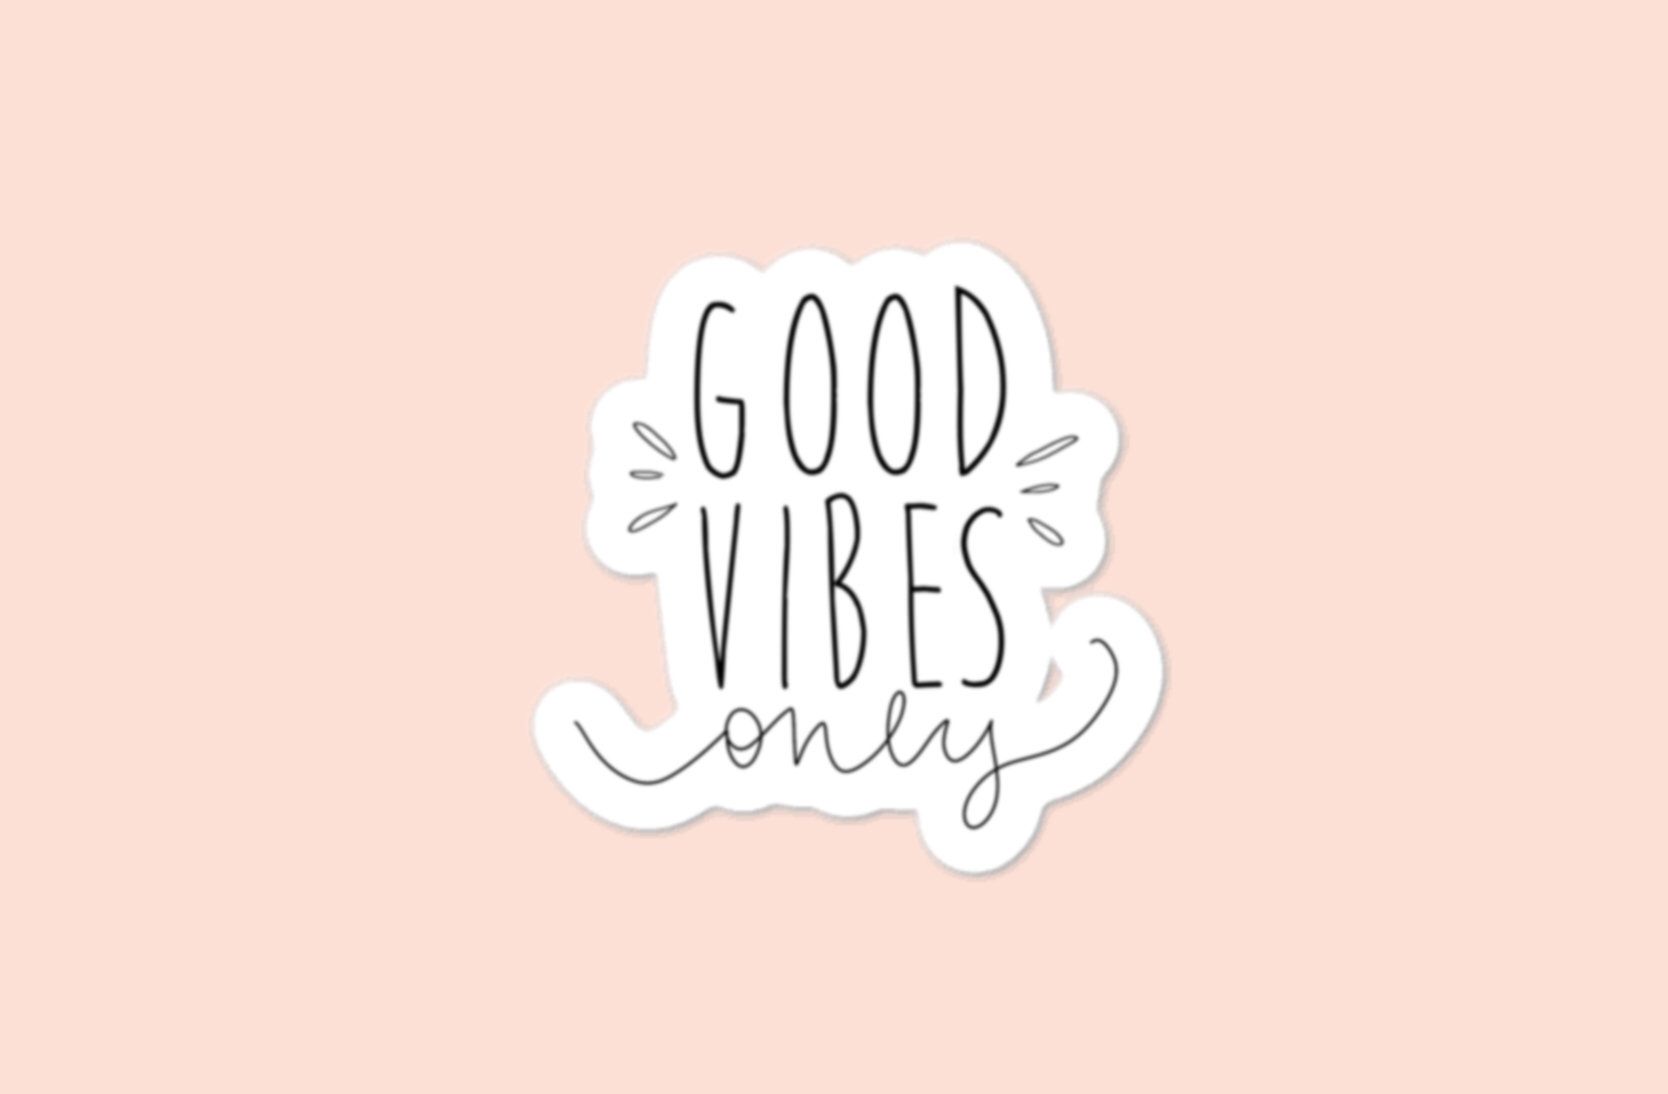 Good vibes laptop wallpapers